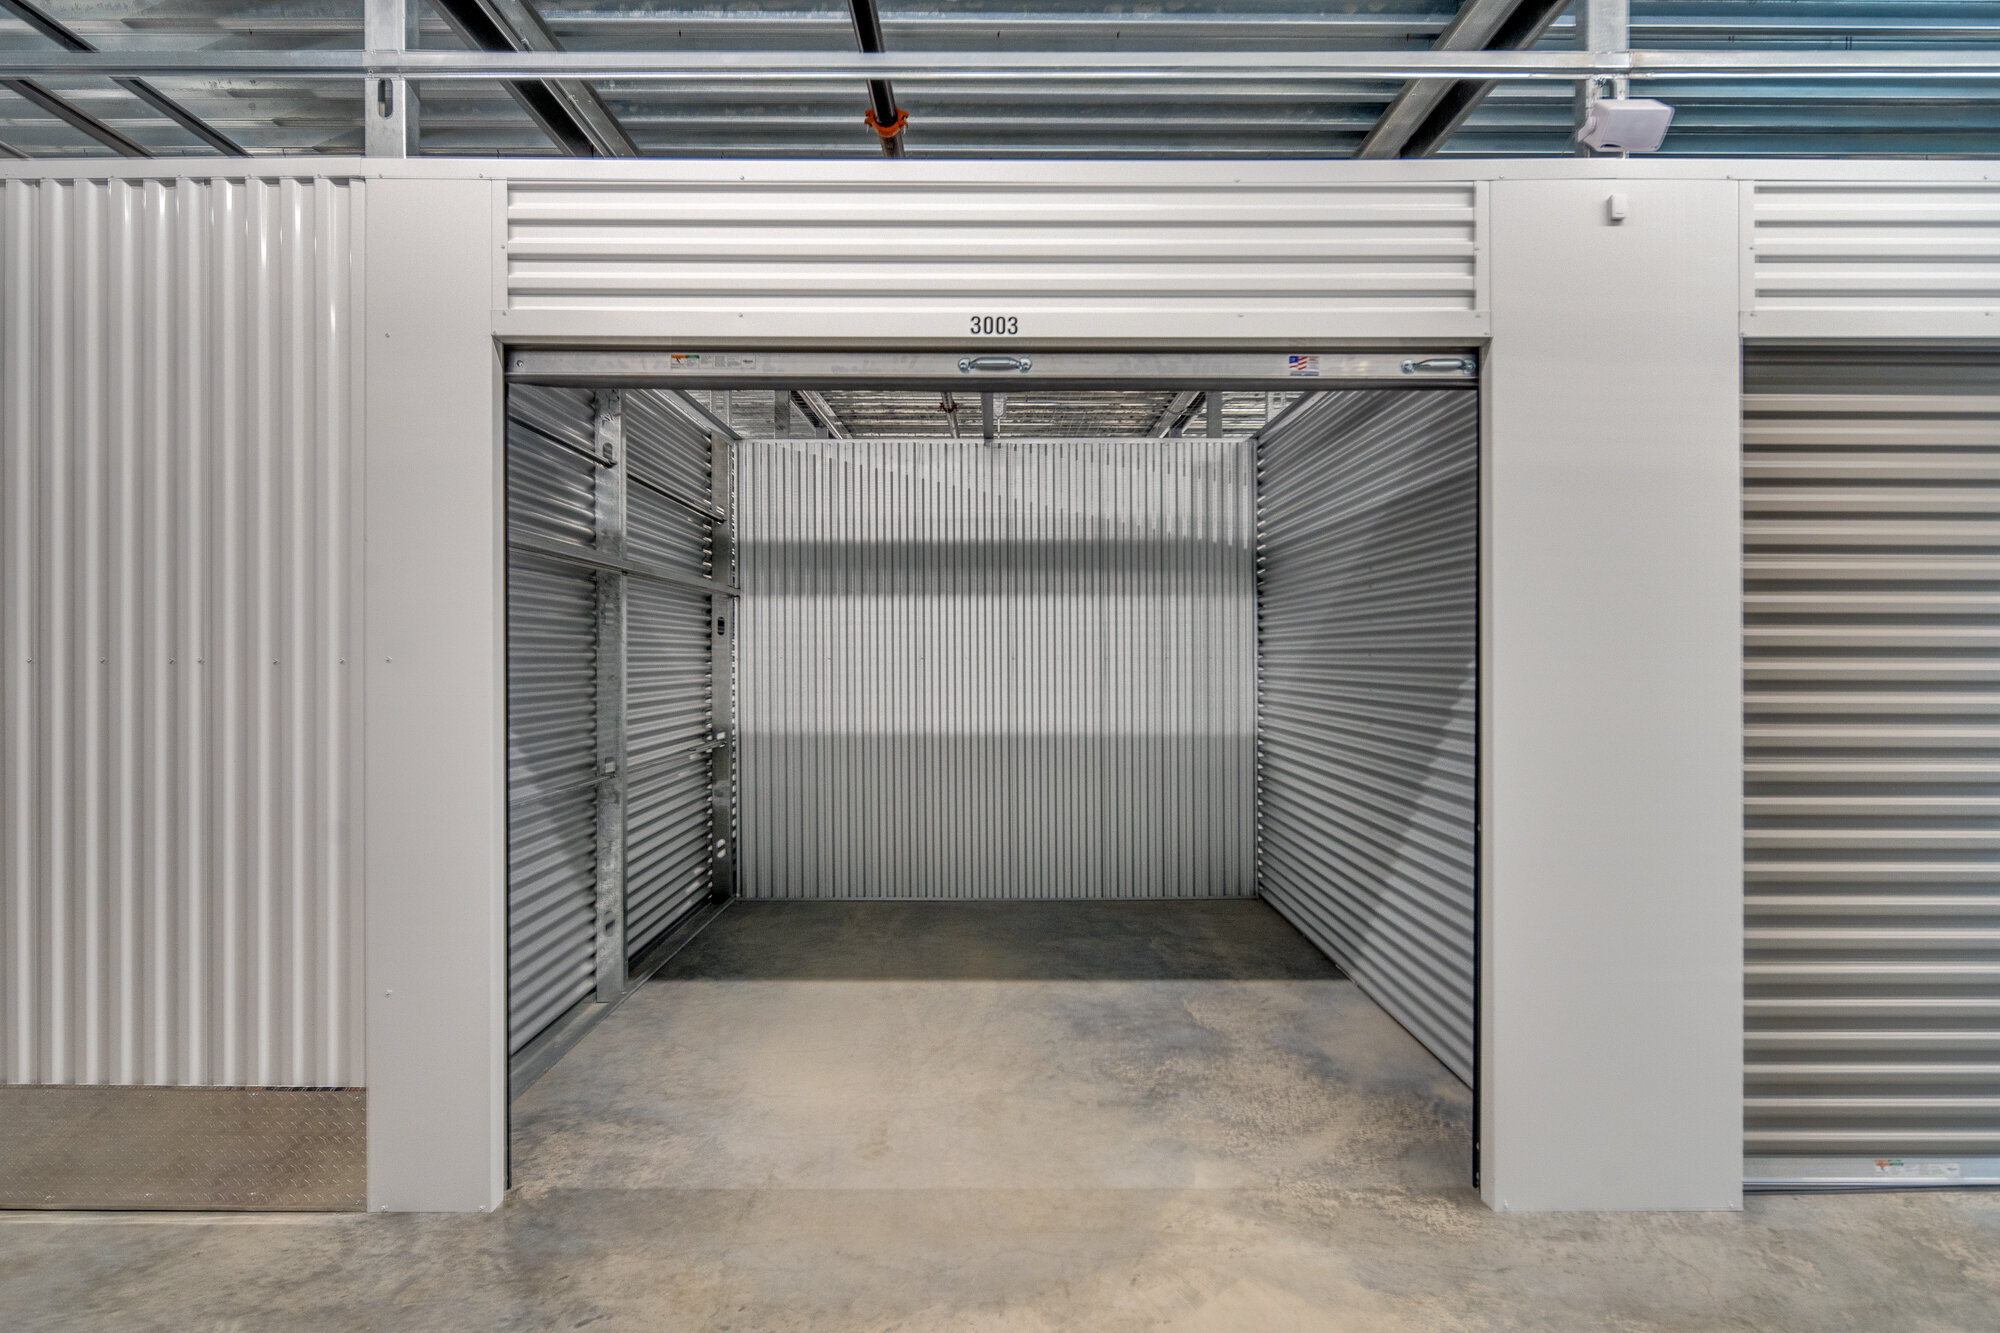 Architectural photography of just one of the hundreds of clean storage units